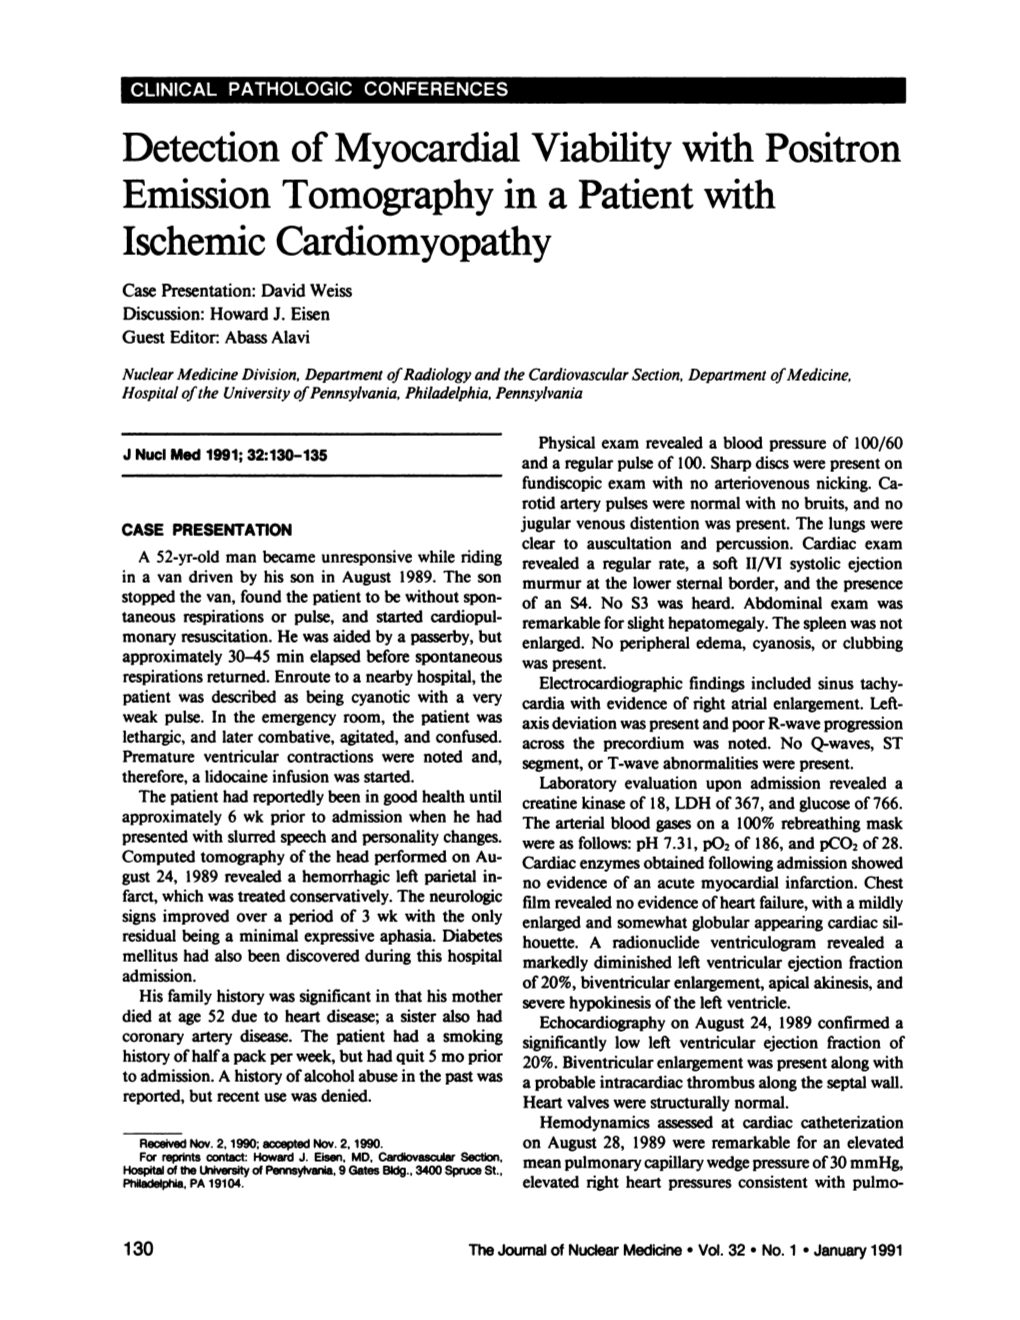 Detection of Myocardial Viability with Positron Emission Tomography in a Patient with Ischemic Cardiomyopathy